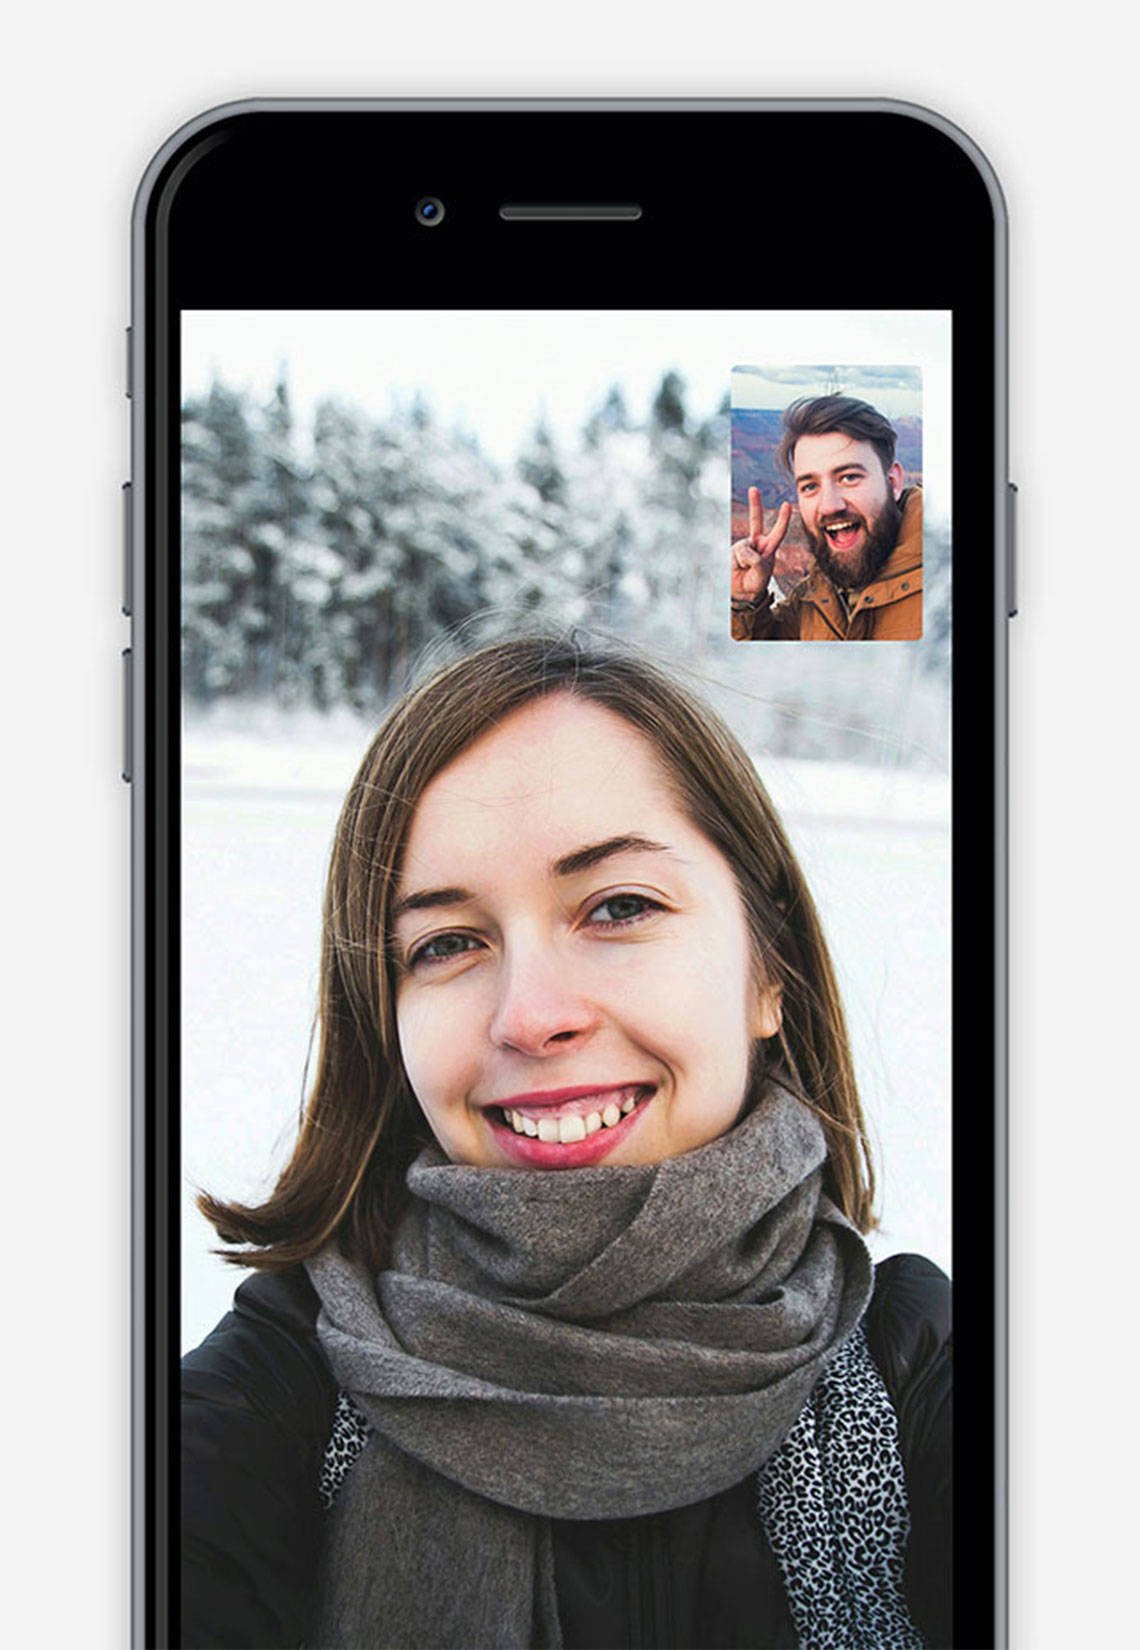 Video calls are clear with servers positions around the world to provide a stable connection.